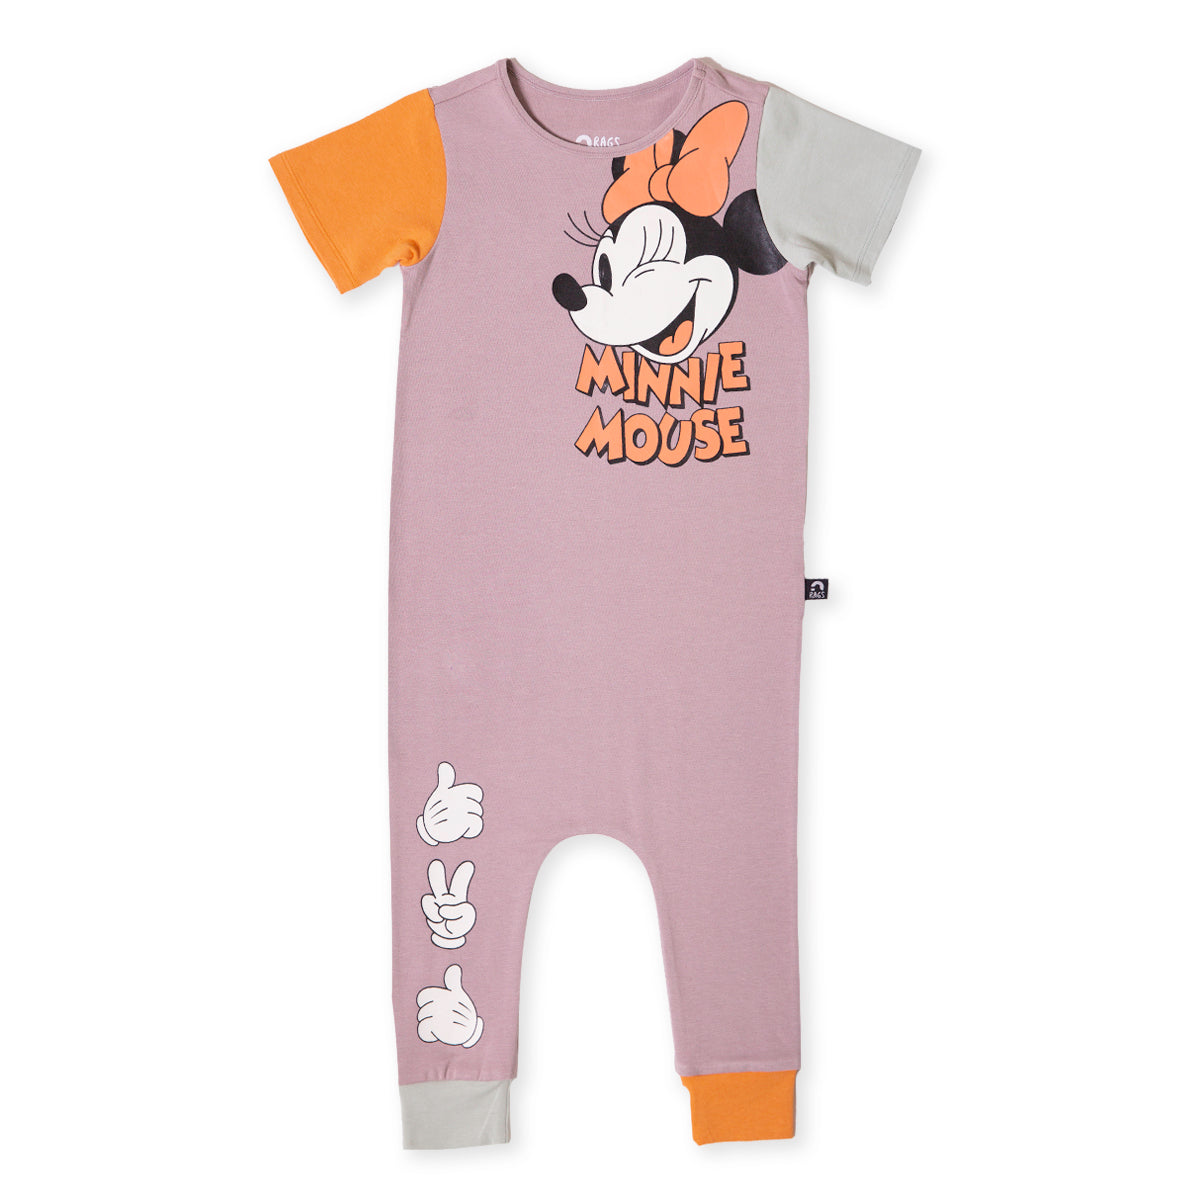 Short Sleeve Rag Romper - 'Minnie Mouse' - Disney Collection from Rags